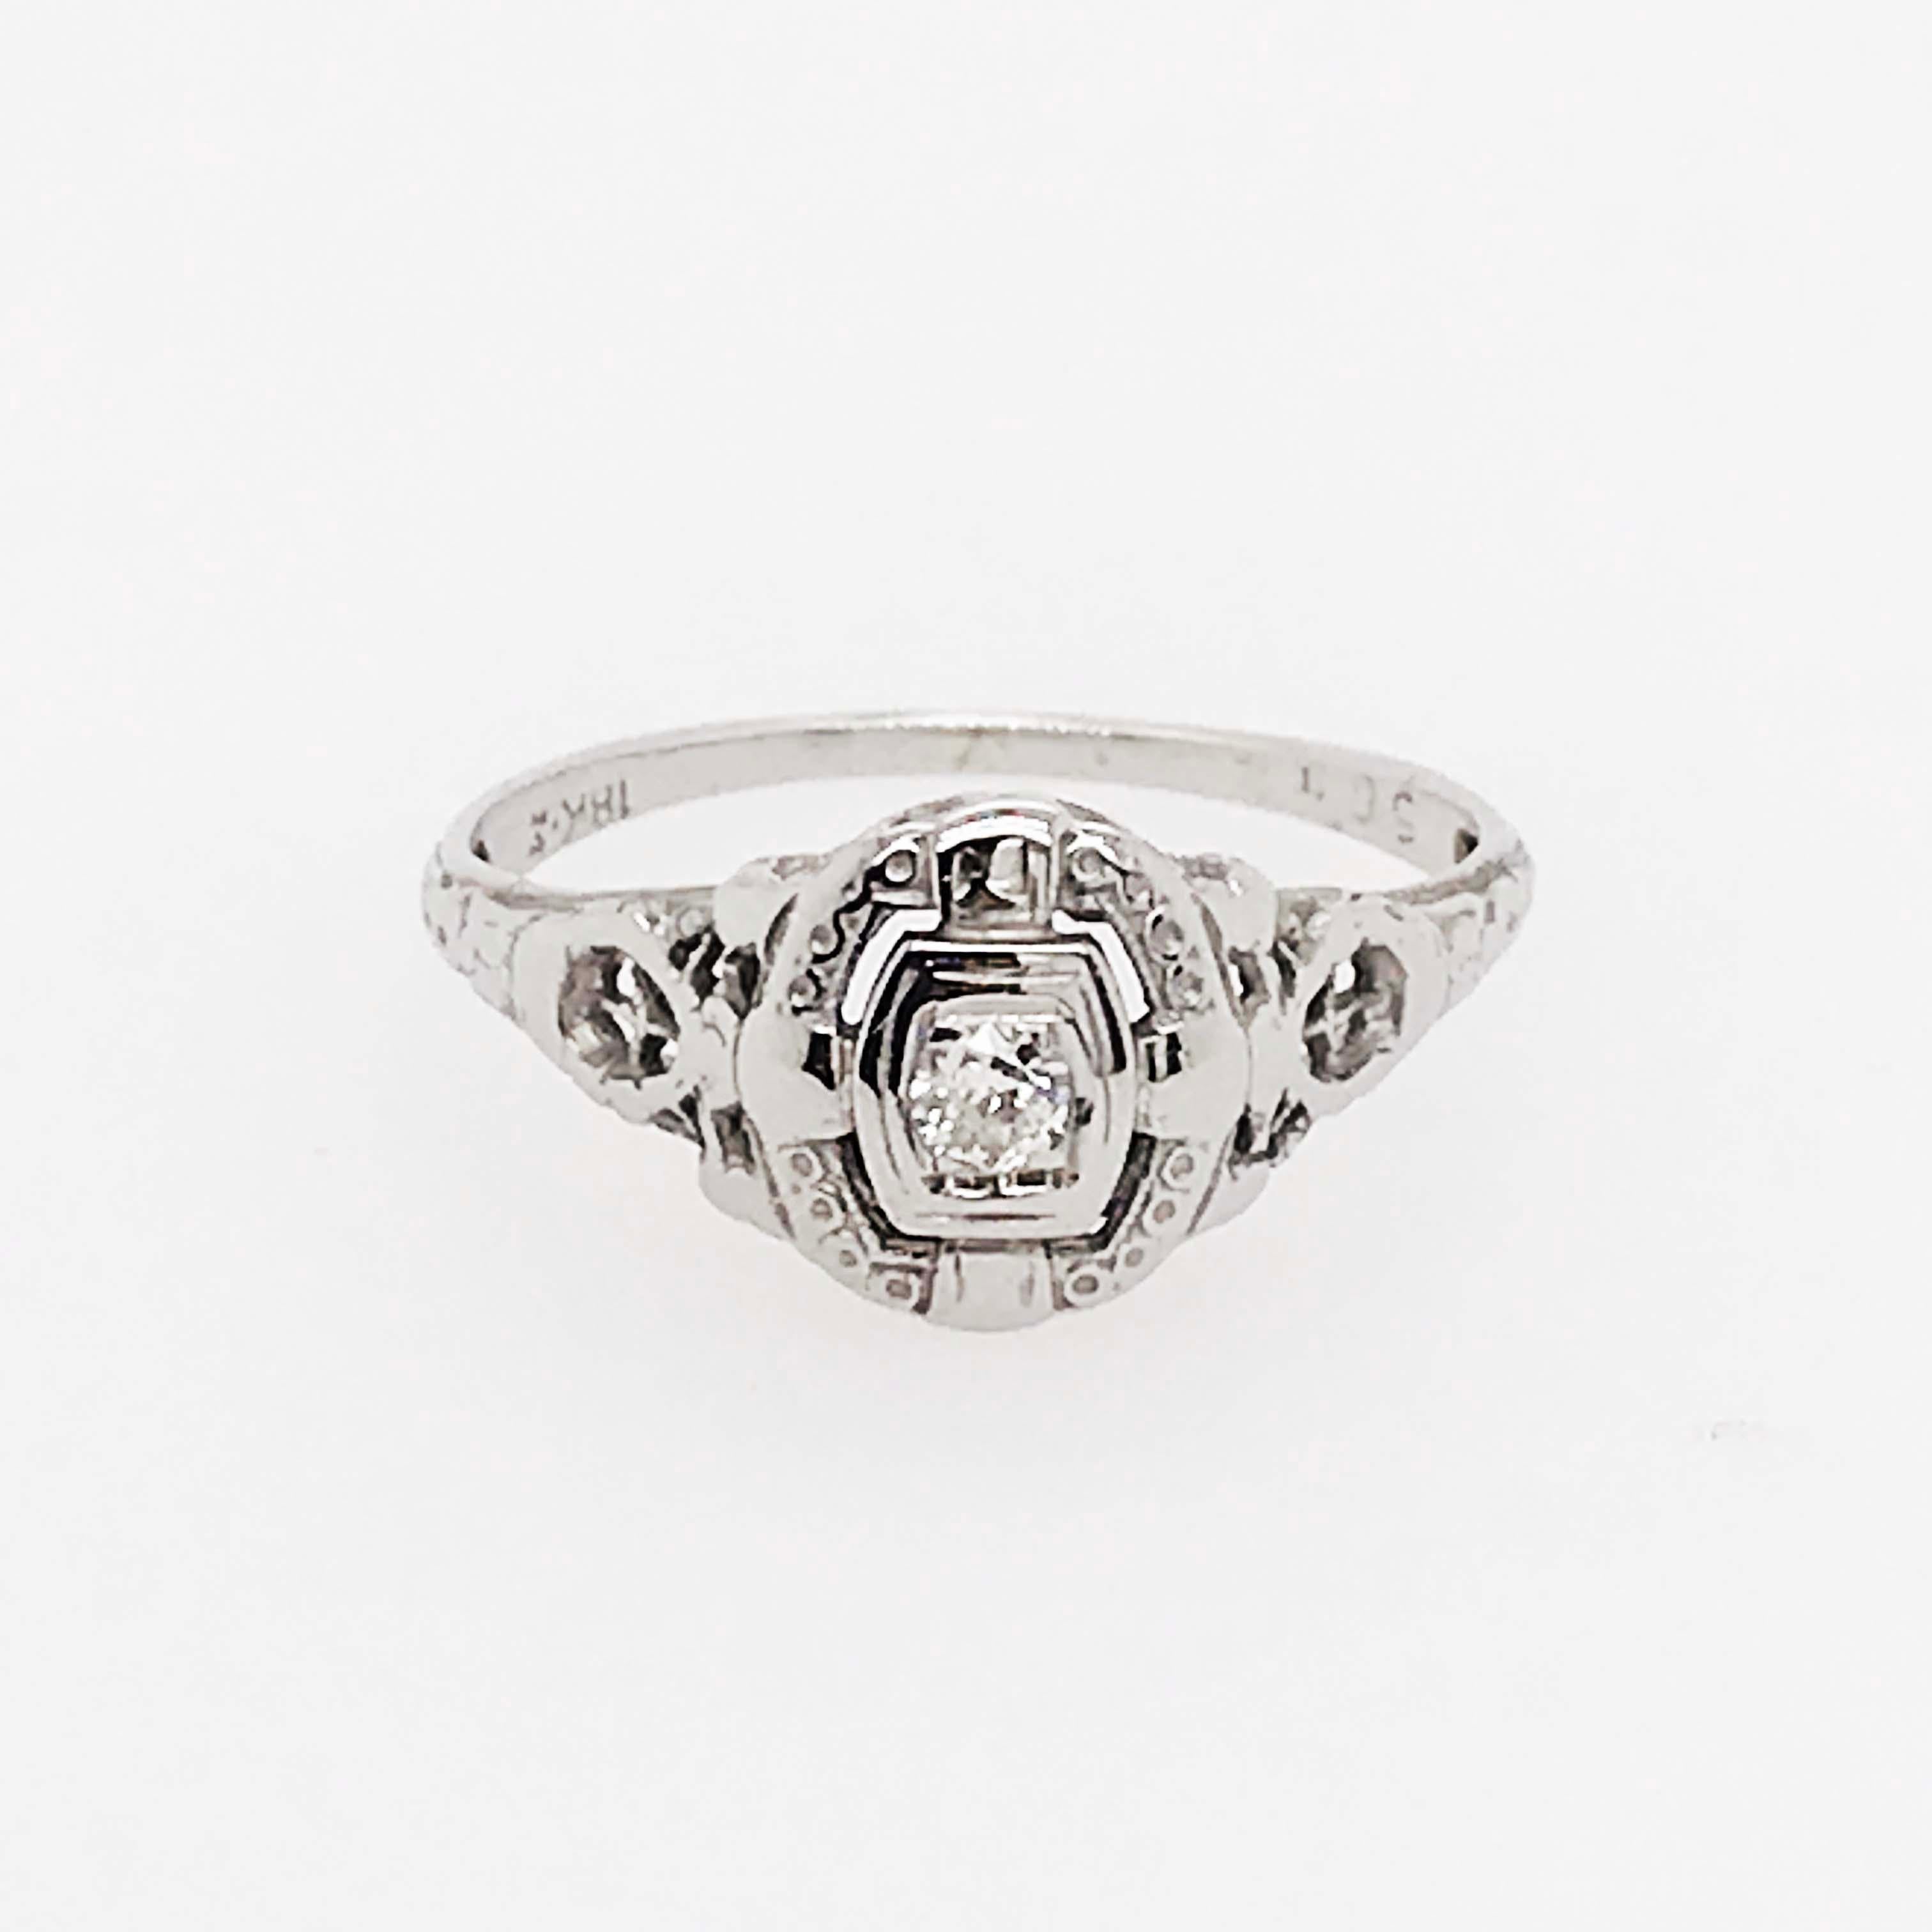 This gorgeous antique diamond engagement ring is a true estate piece and in amazing condition with the original center diamond and original 18 karat white gold. With a round brilliant diamond set in the center on a cushion shaped illusion setting.